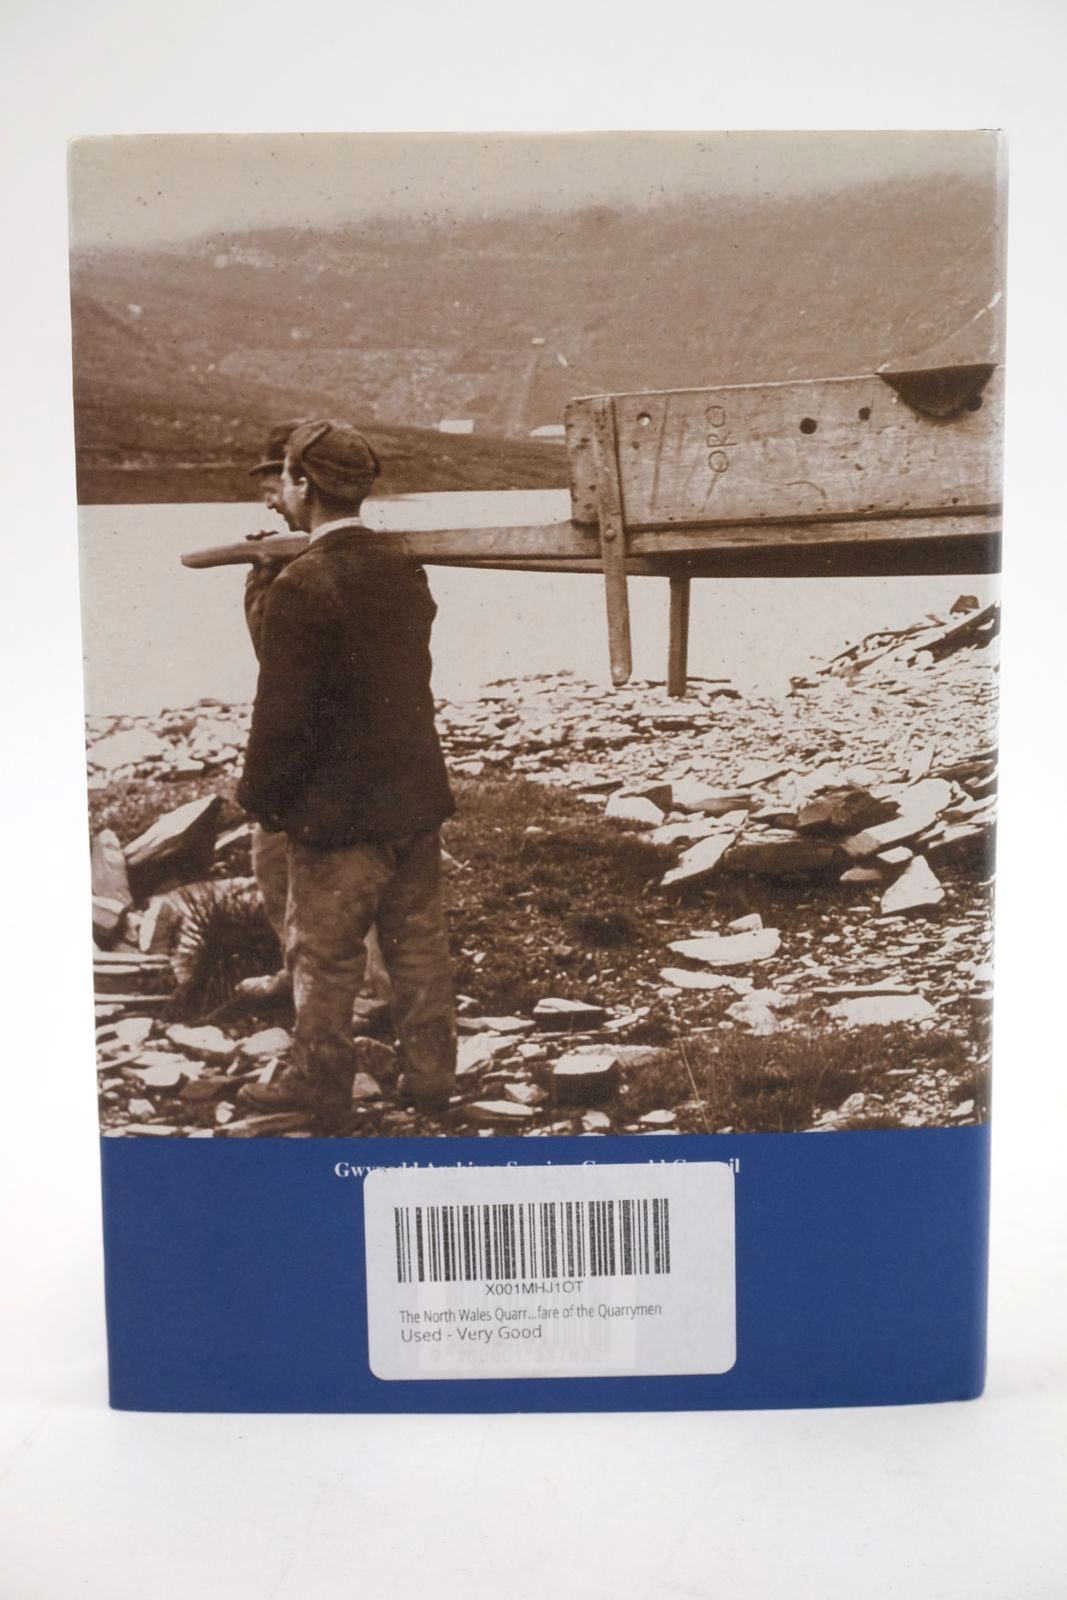 Photo of THE NORTH WALES QUARRY HOSPITALES AND THE HEALTH AND WELFARE OF THE QUARRYMEN written by Davies, Edward published by Gwynedd Archive Services (STOCK CODE: 1324140)  for sale by Stella & Rose's Books